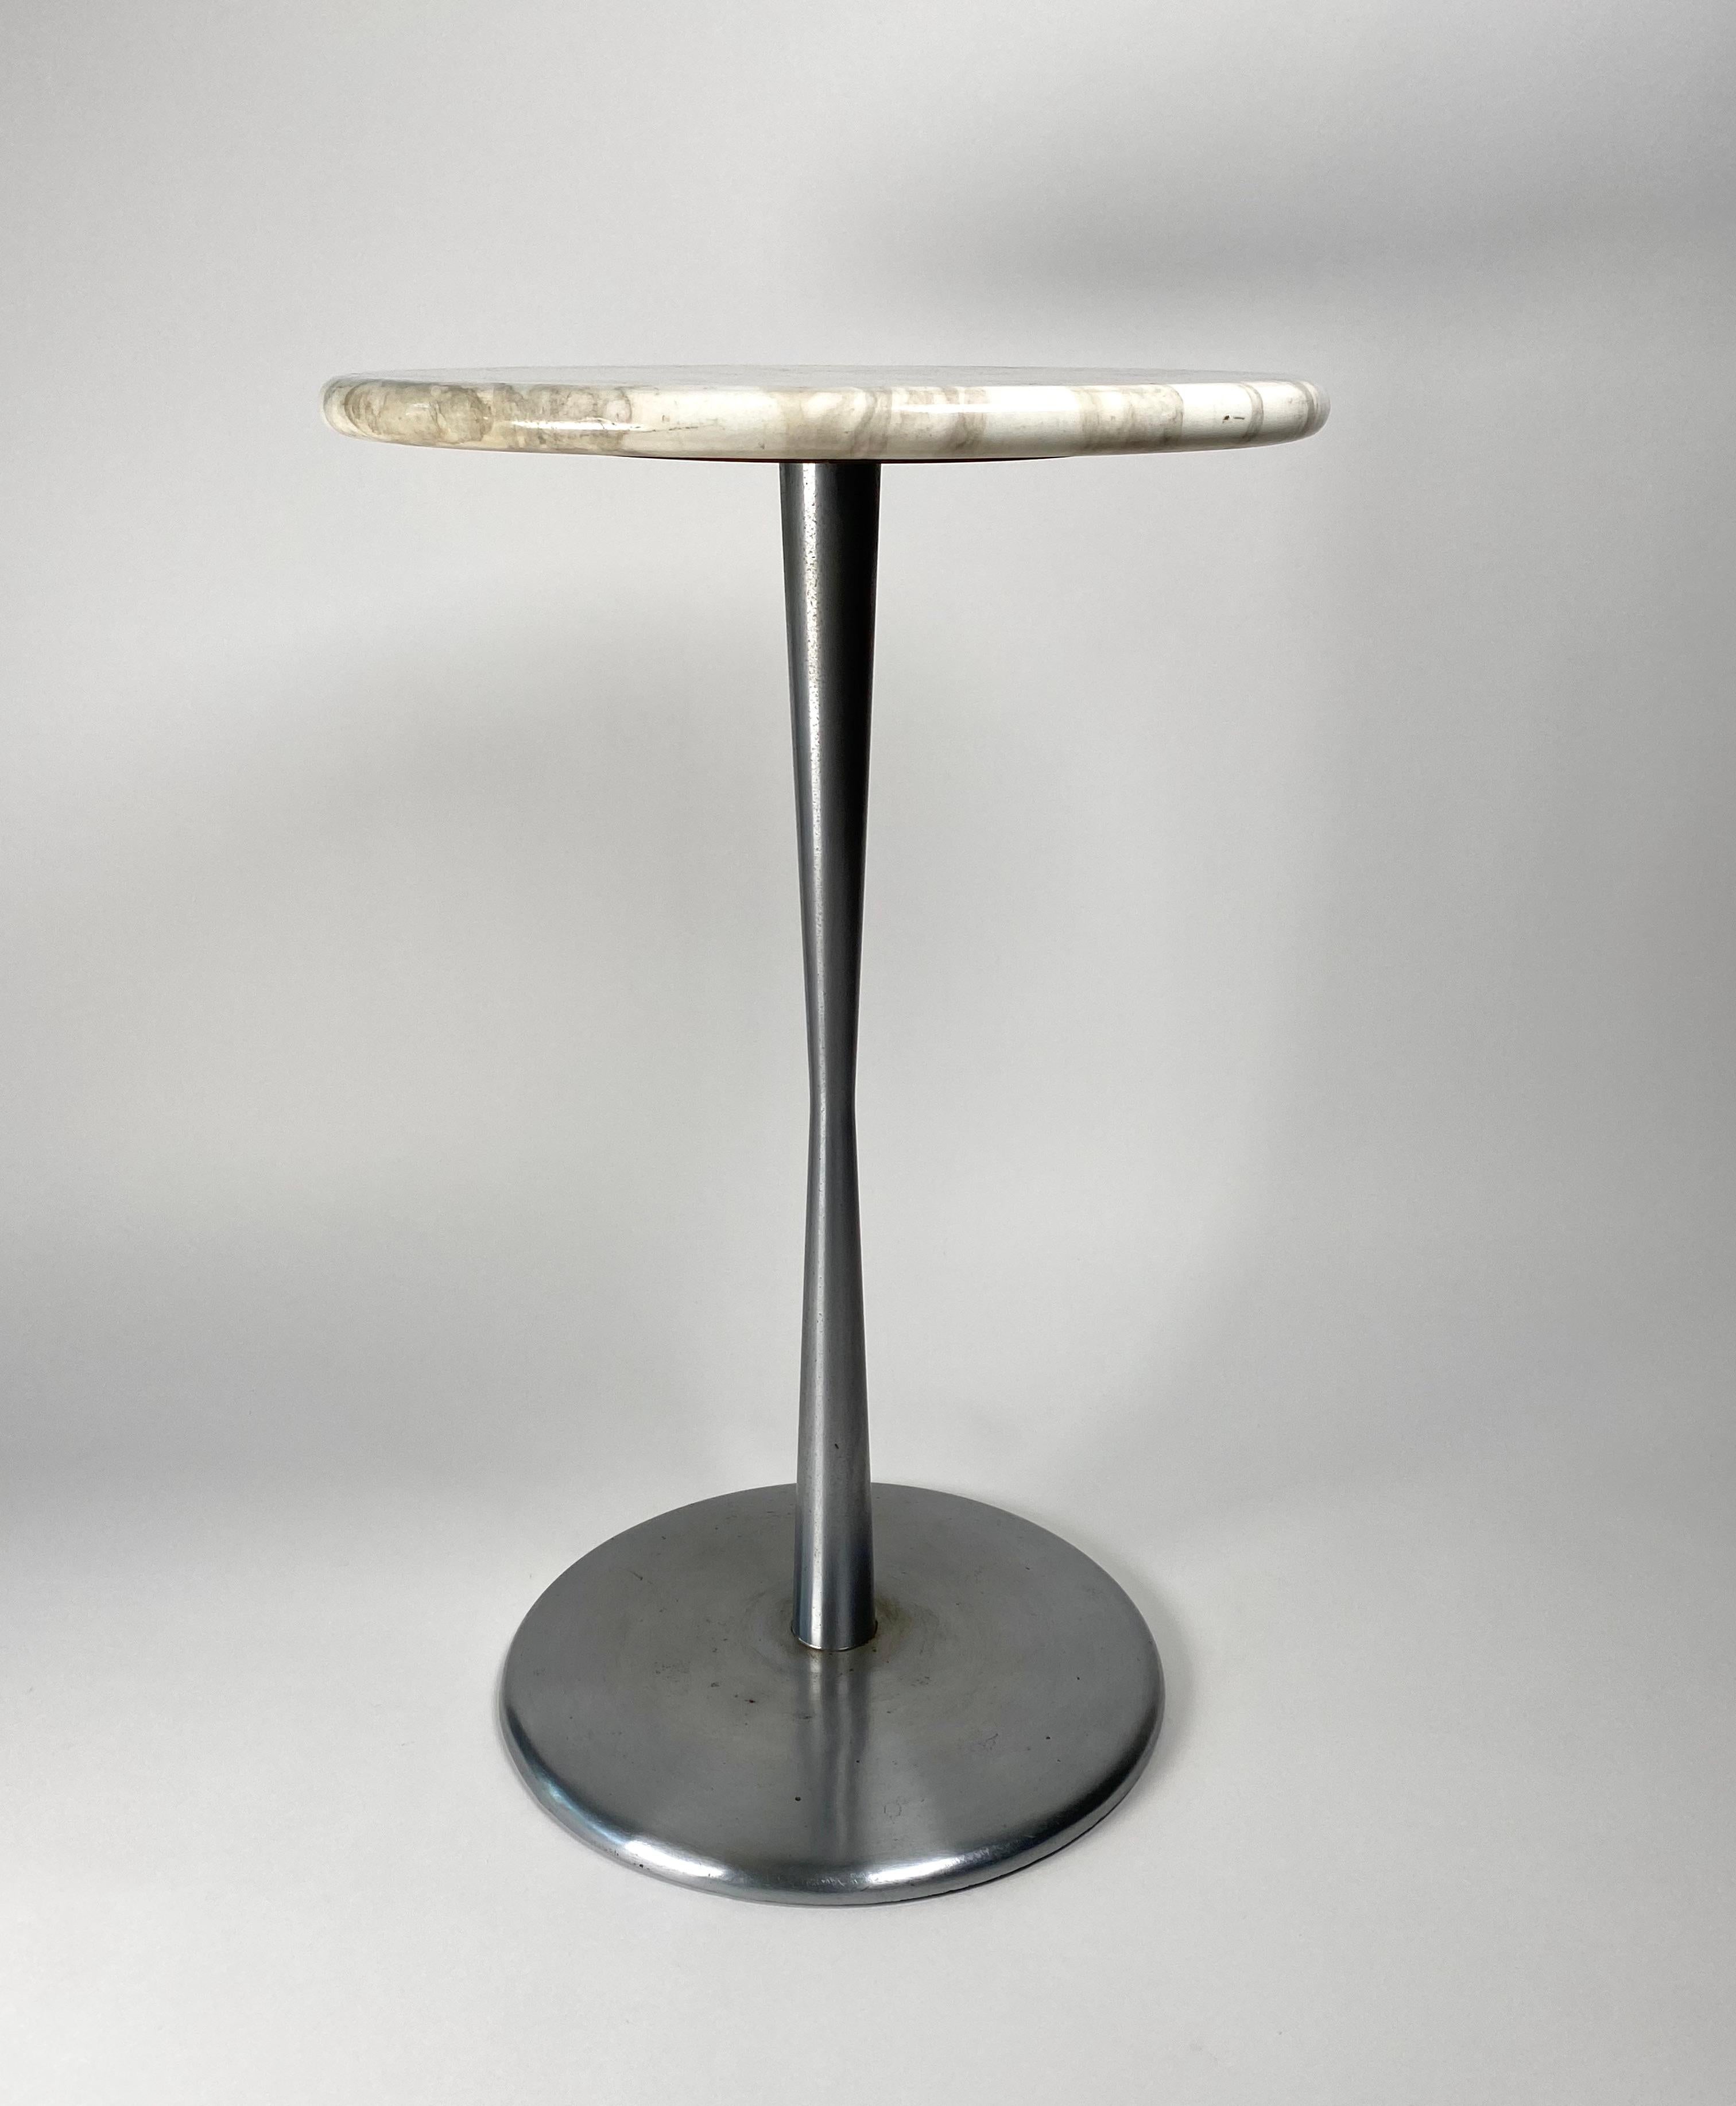 A one of a kind side table by the design duo Erwine and Estelle Laverne for their company Laverne Originals of New York. This belonged to a New York Interior Designer and was in her apartment during the early 1960s and was also part of an interior